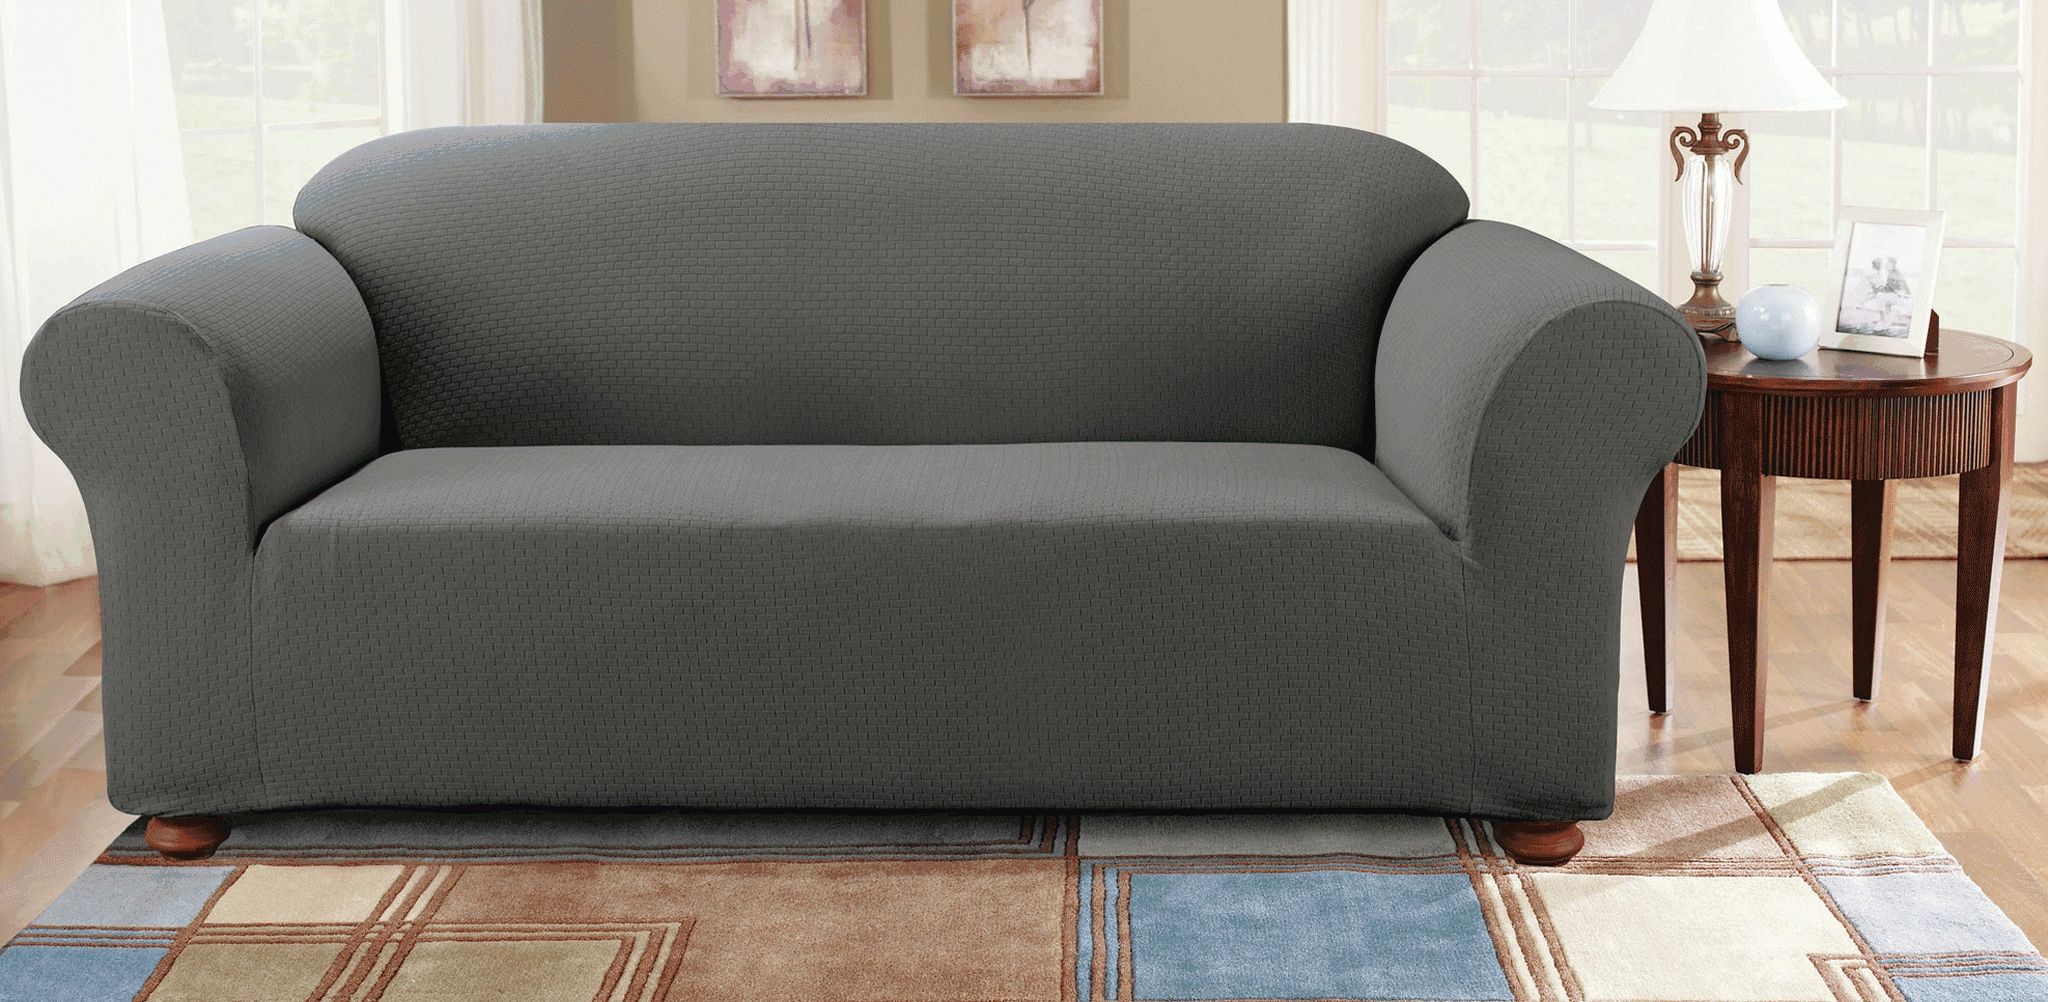 Furniture: Walmart Couch Covers | Couch Covers At Walmart | Sofa Throughout Armless Couch Slipcovers (View 12 of 15)